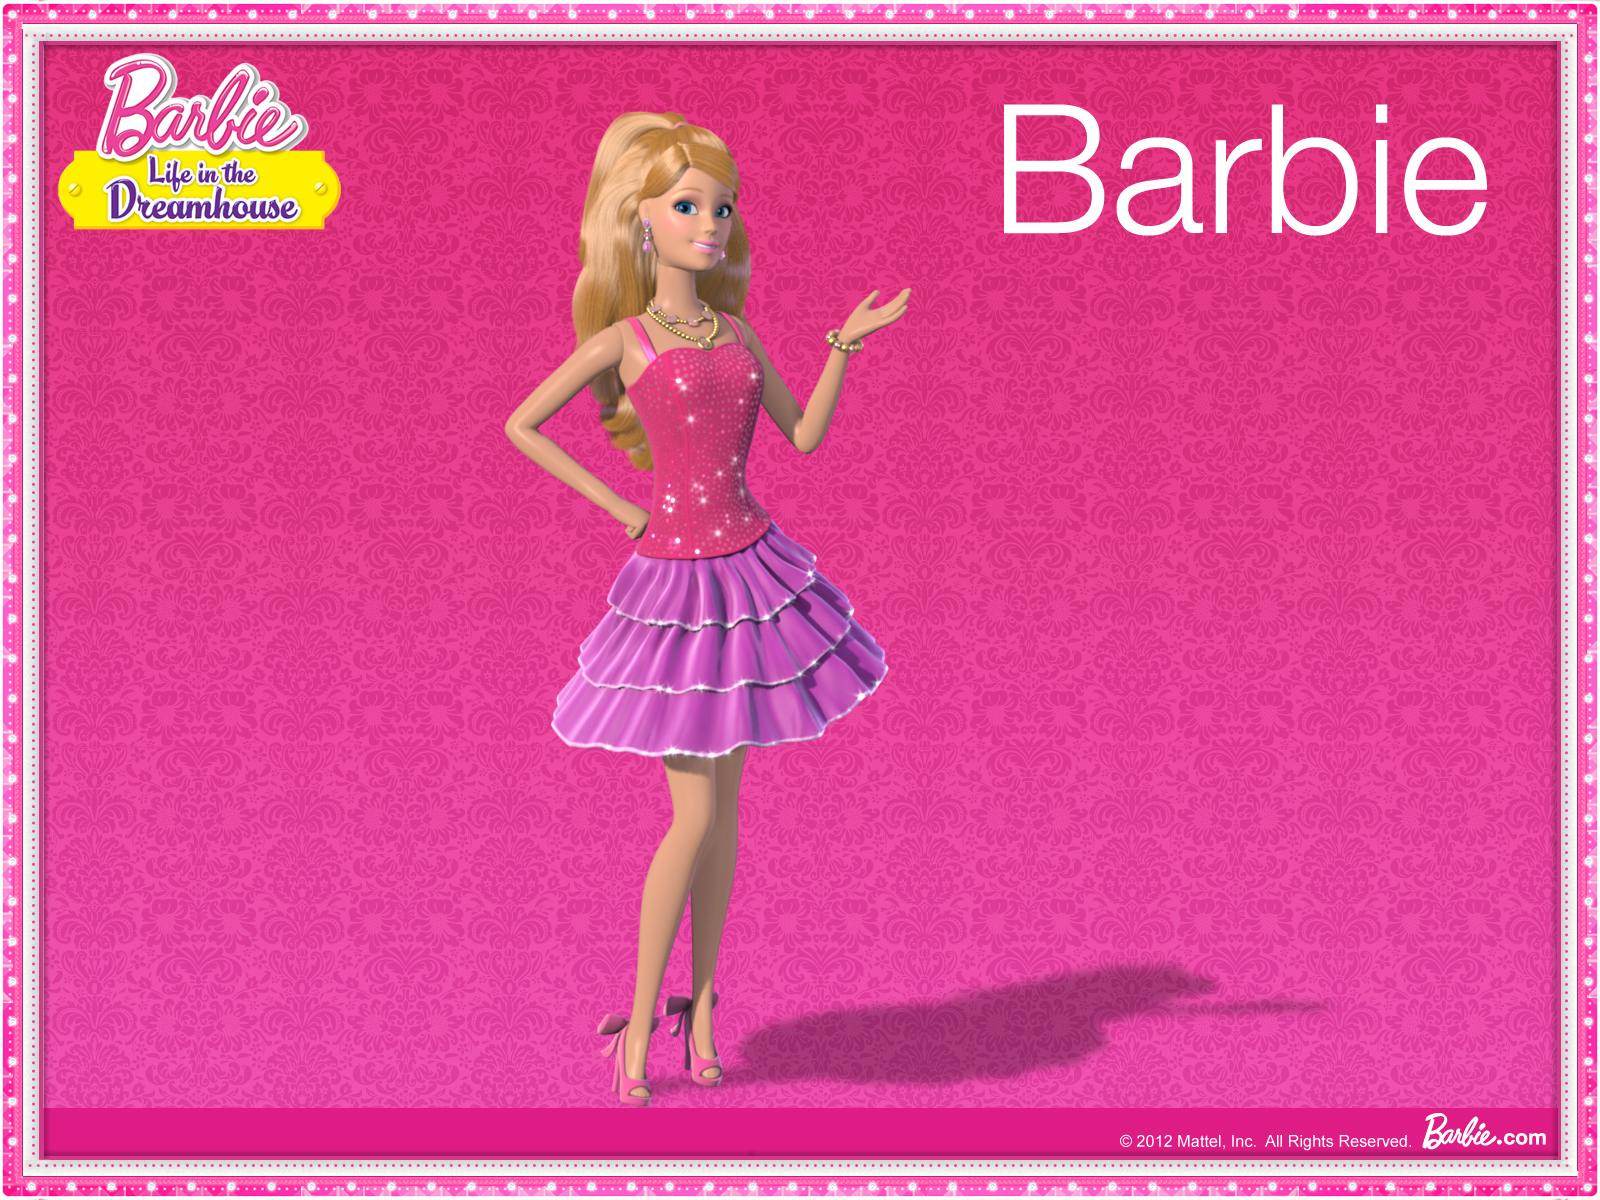 barbie life in the dreamhouse   Barbie Movies Wallpaper 30807883 1600x1200